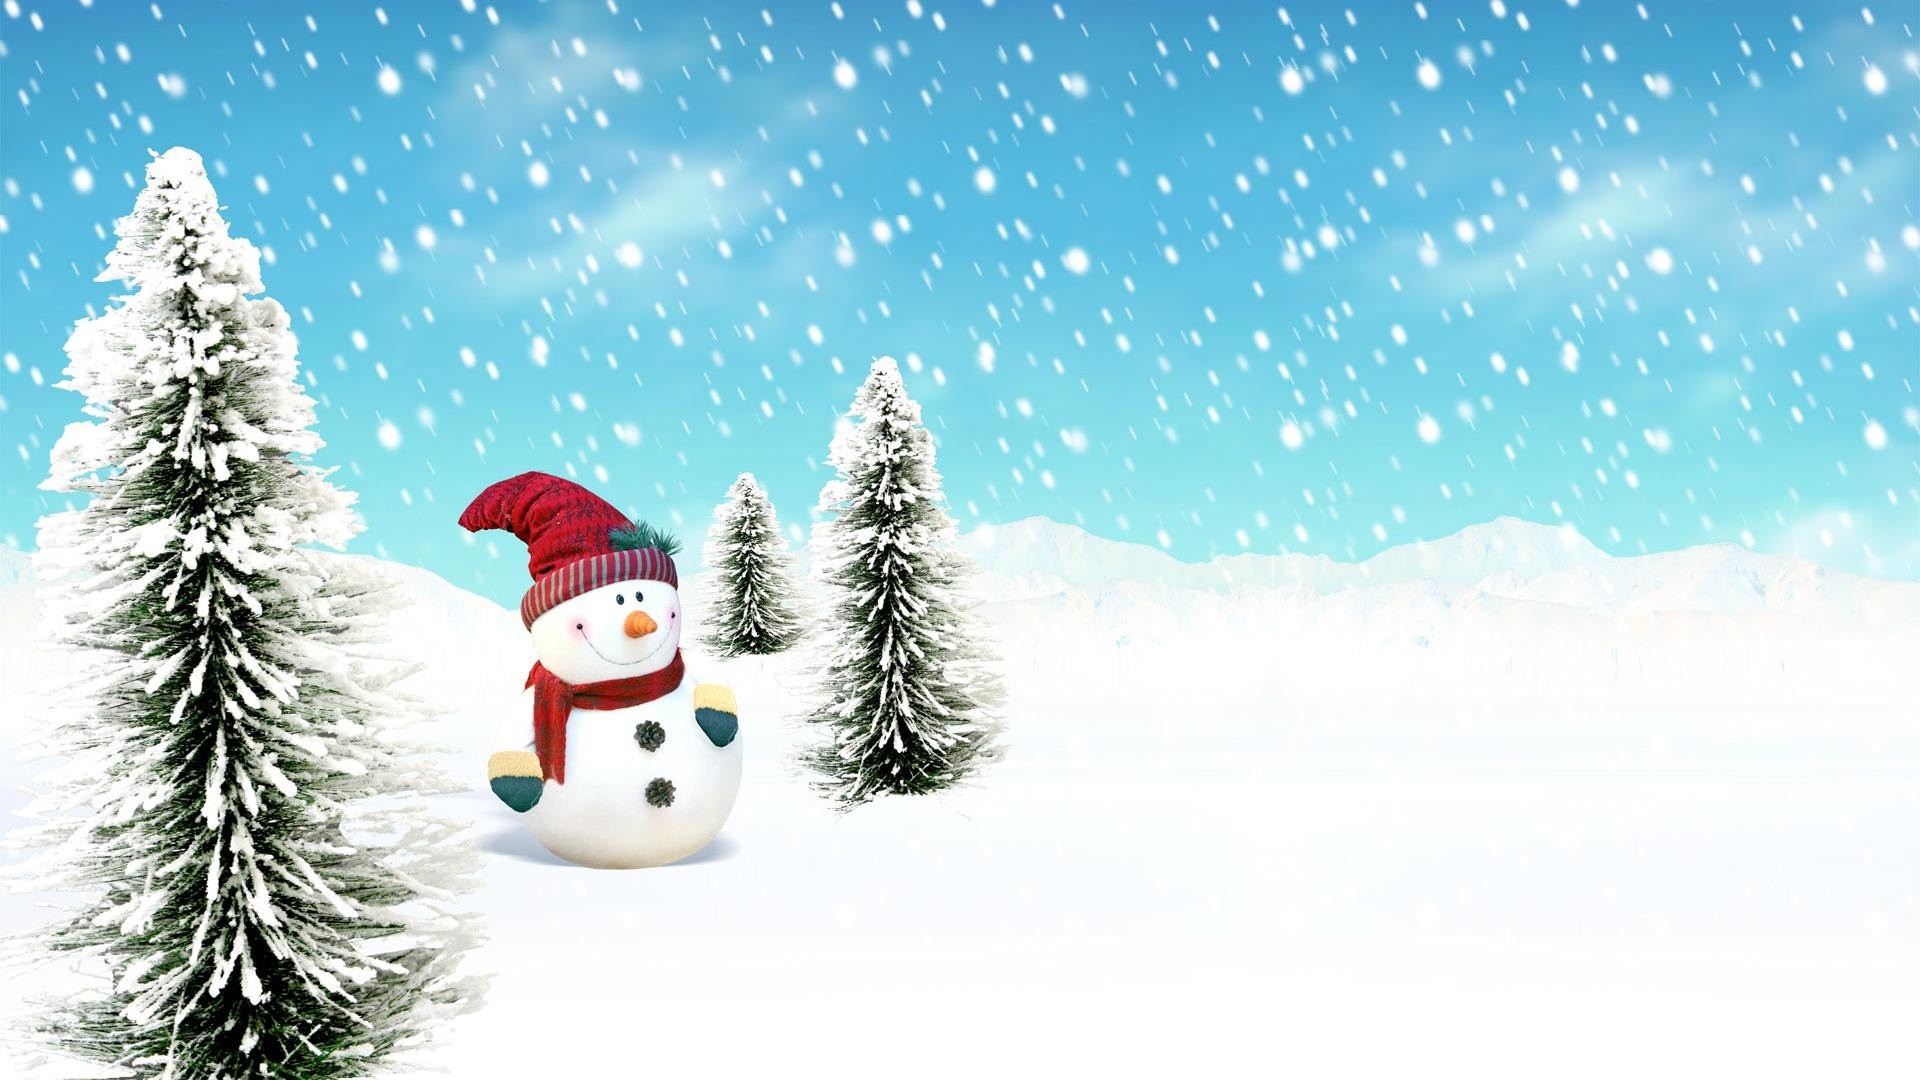 1920x1080 Choose among our big list of beautiful Widescreen Christmas wallpapers.  Widescreen Christmas wallpapers are made in resolutions perfect for widescr…